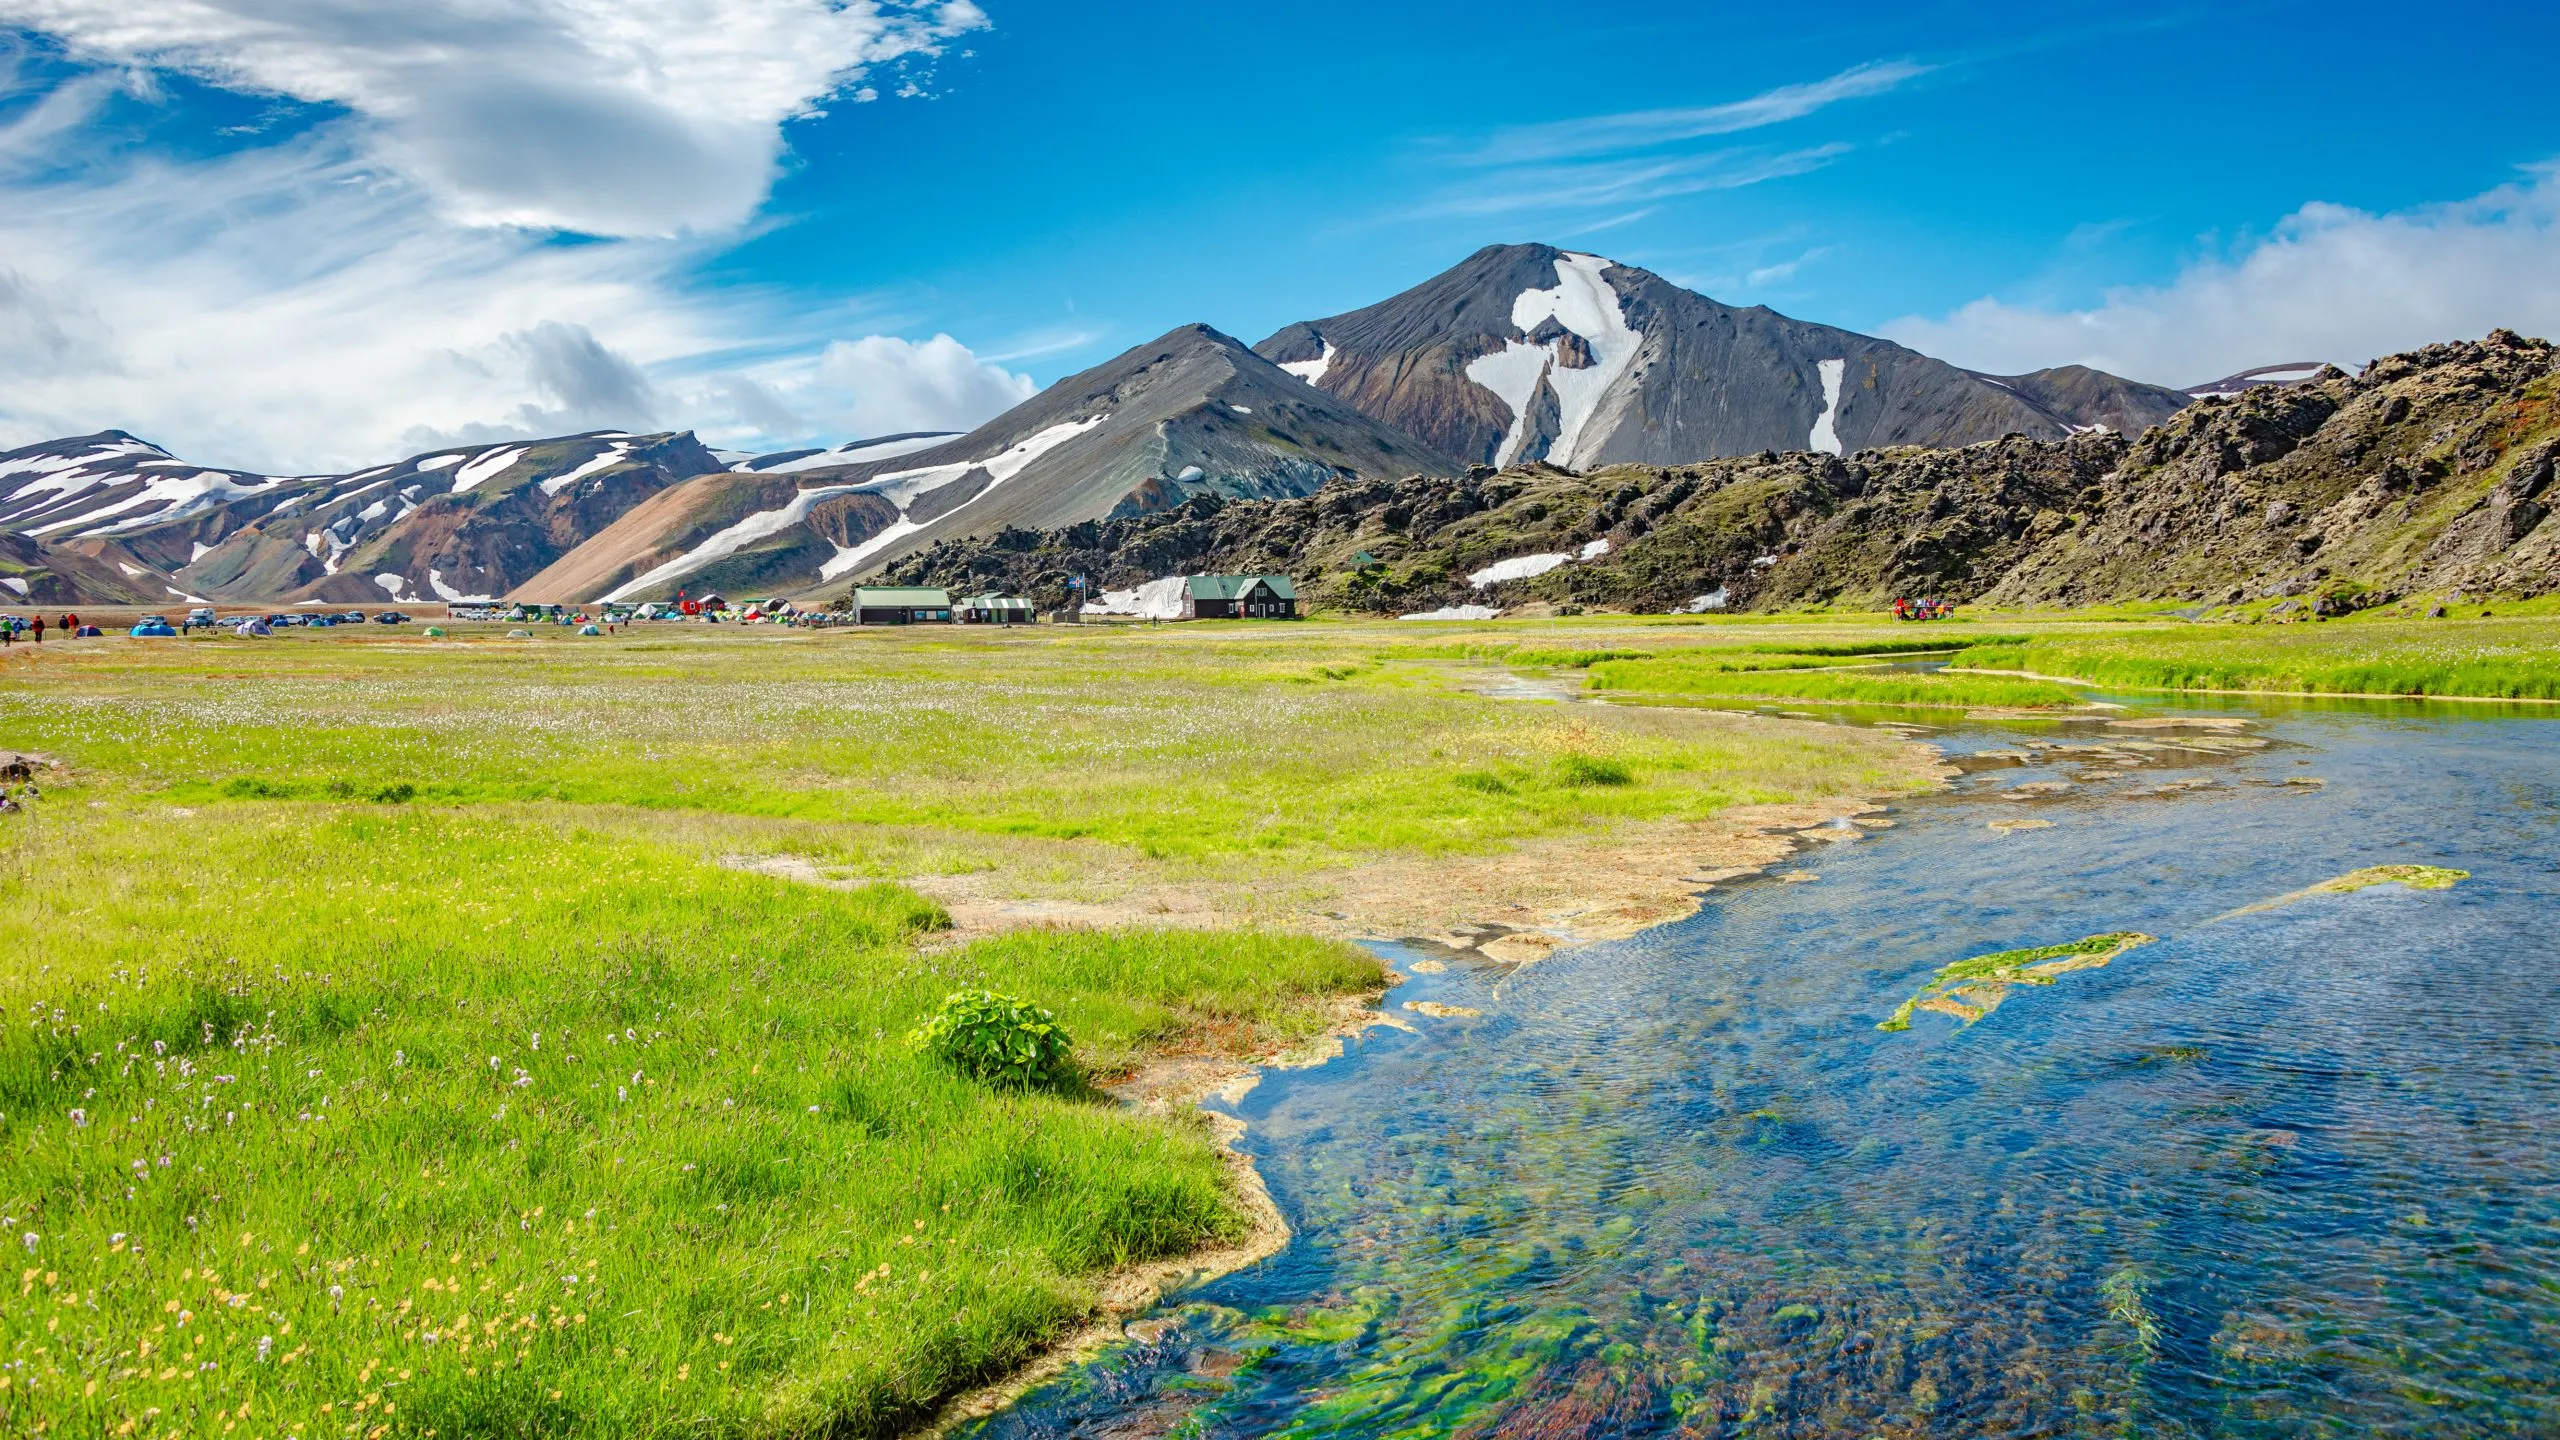 Landmannalaugar, Iceland. View at camping site and mountain hut with many tents and cars, and huge lava field, Icelandic landscape of colorful rainbow volcanic mountains at Laugavegur hiking trail